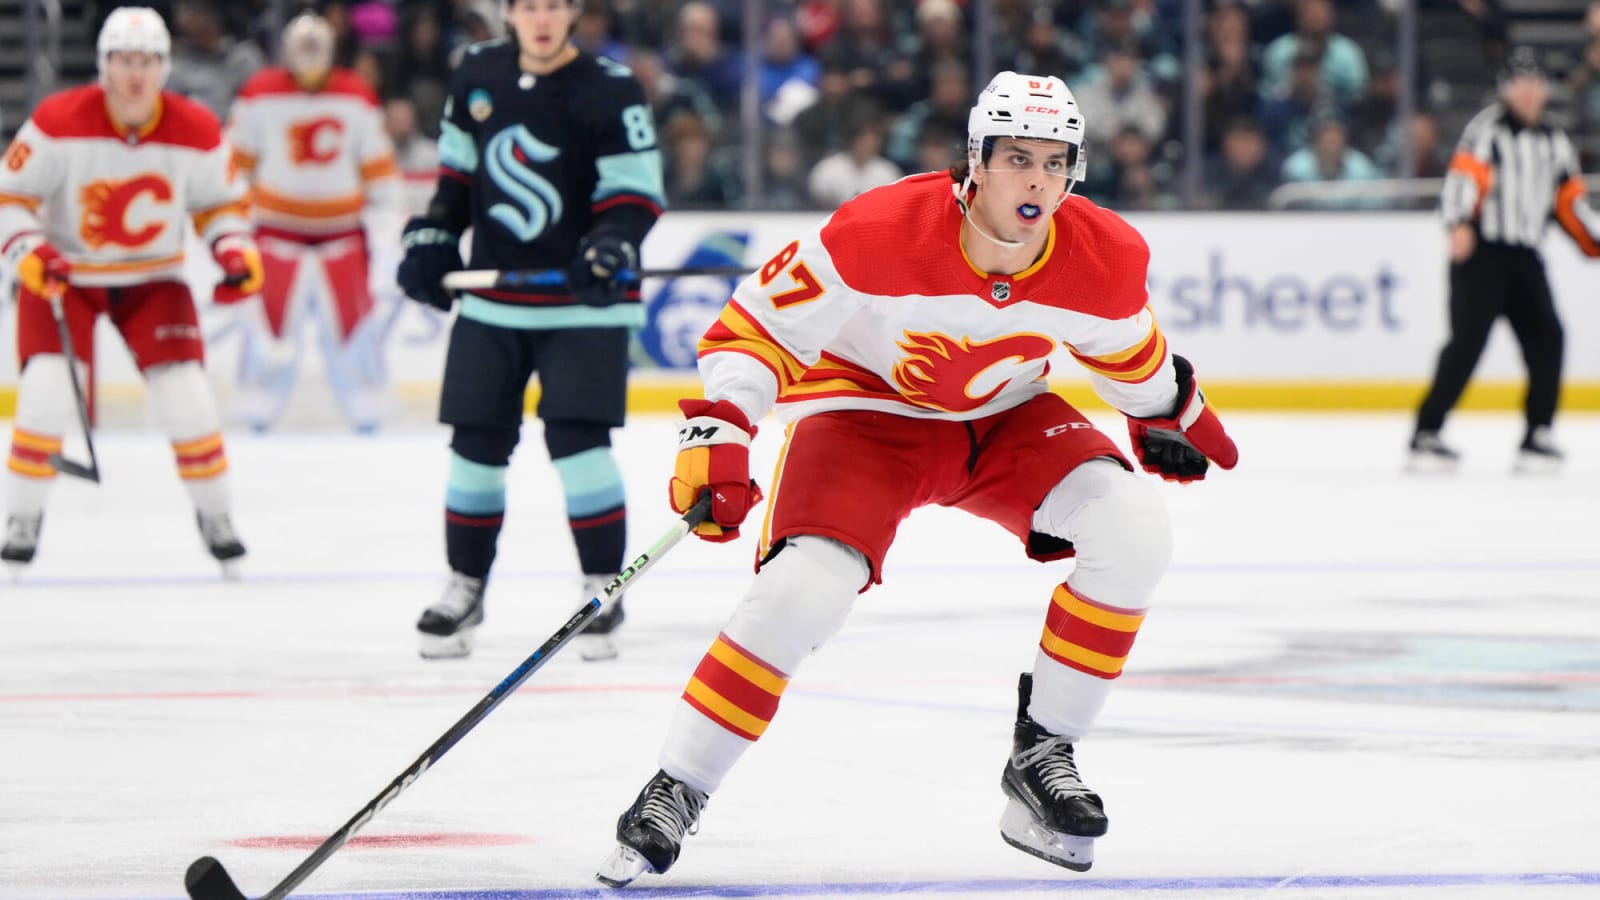 The playoffs continue for some prospects: a Calgary Flames prospect update